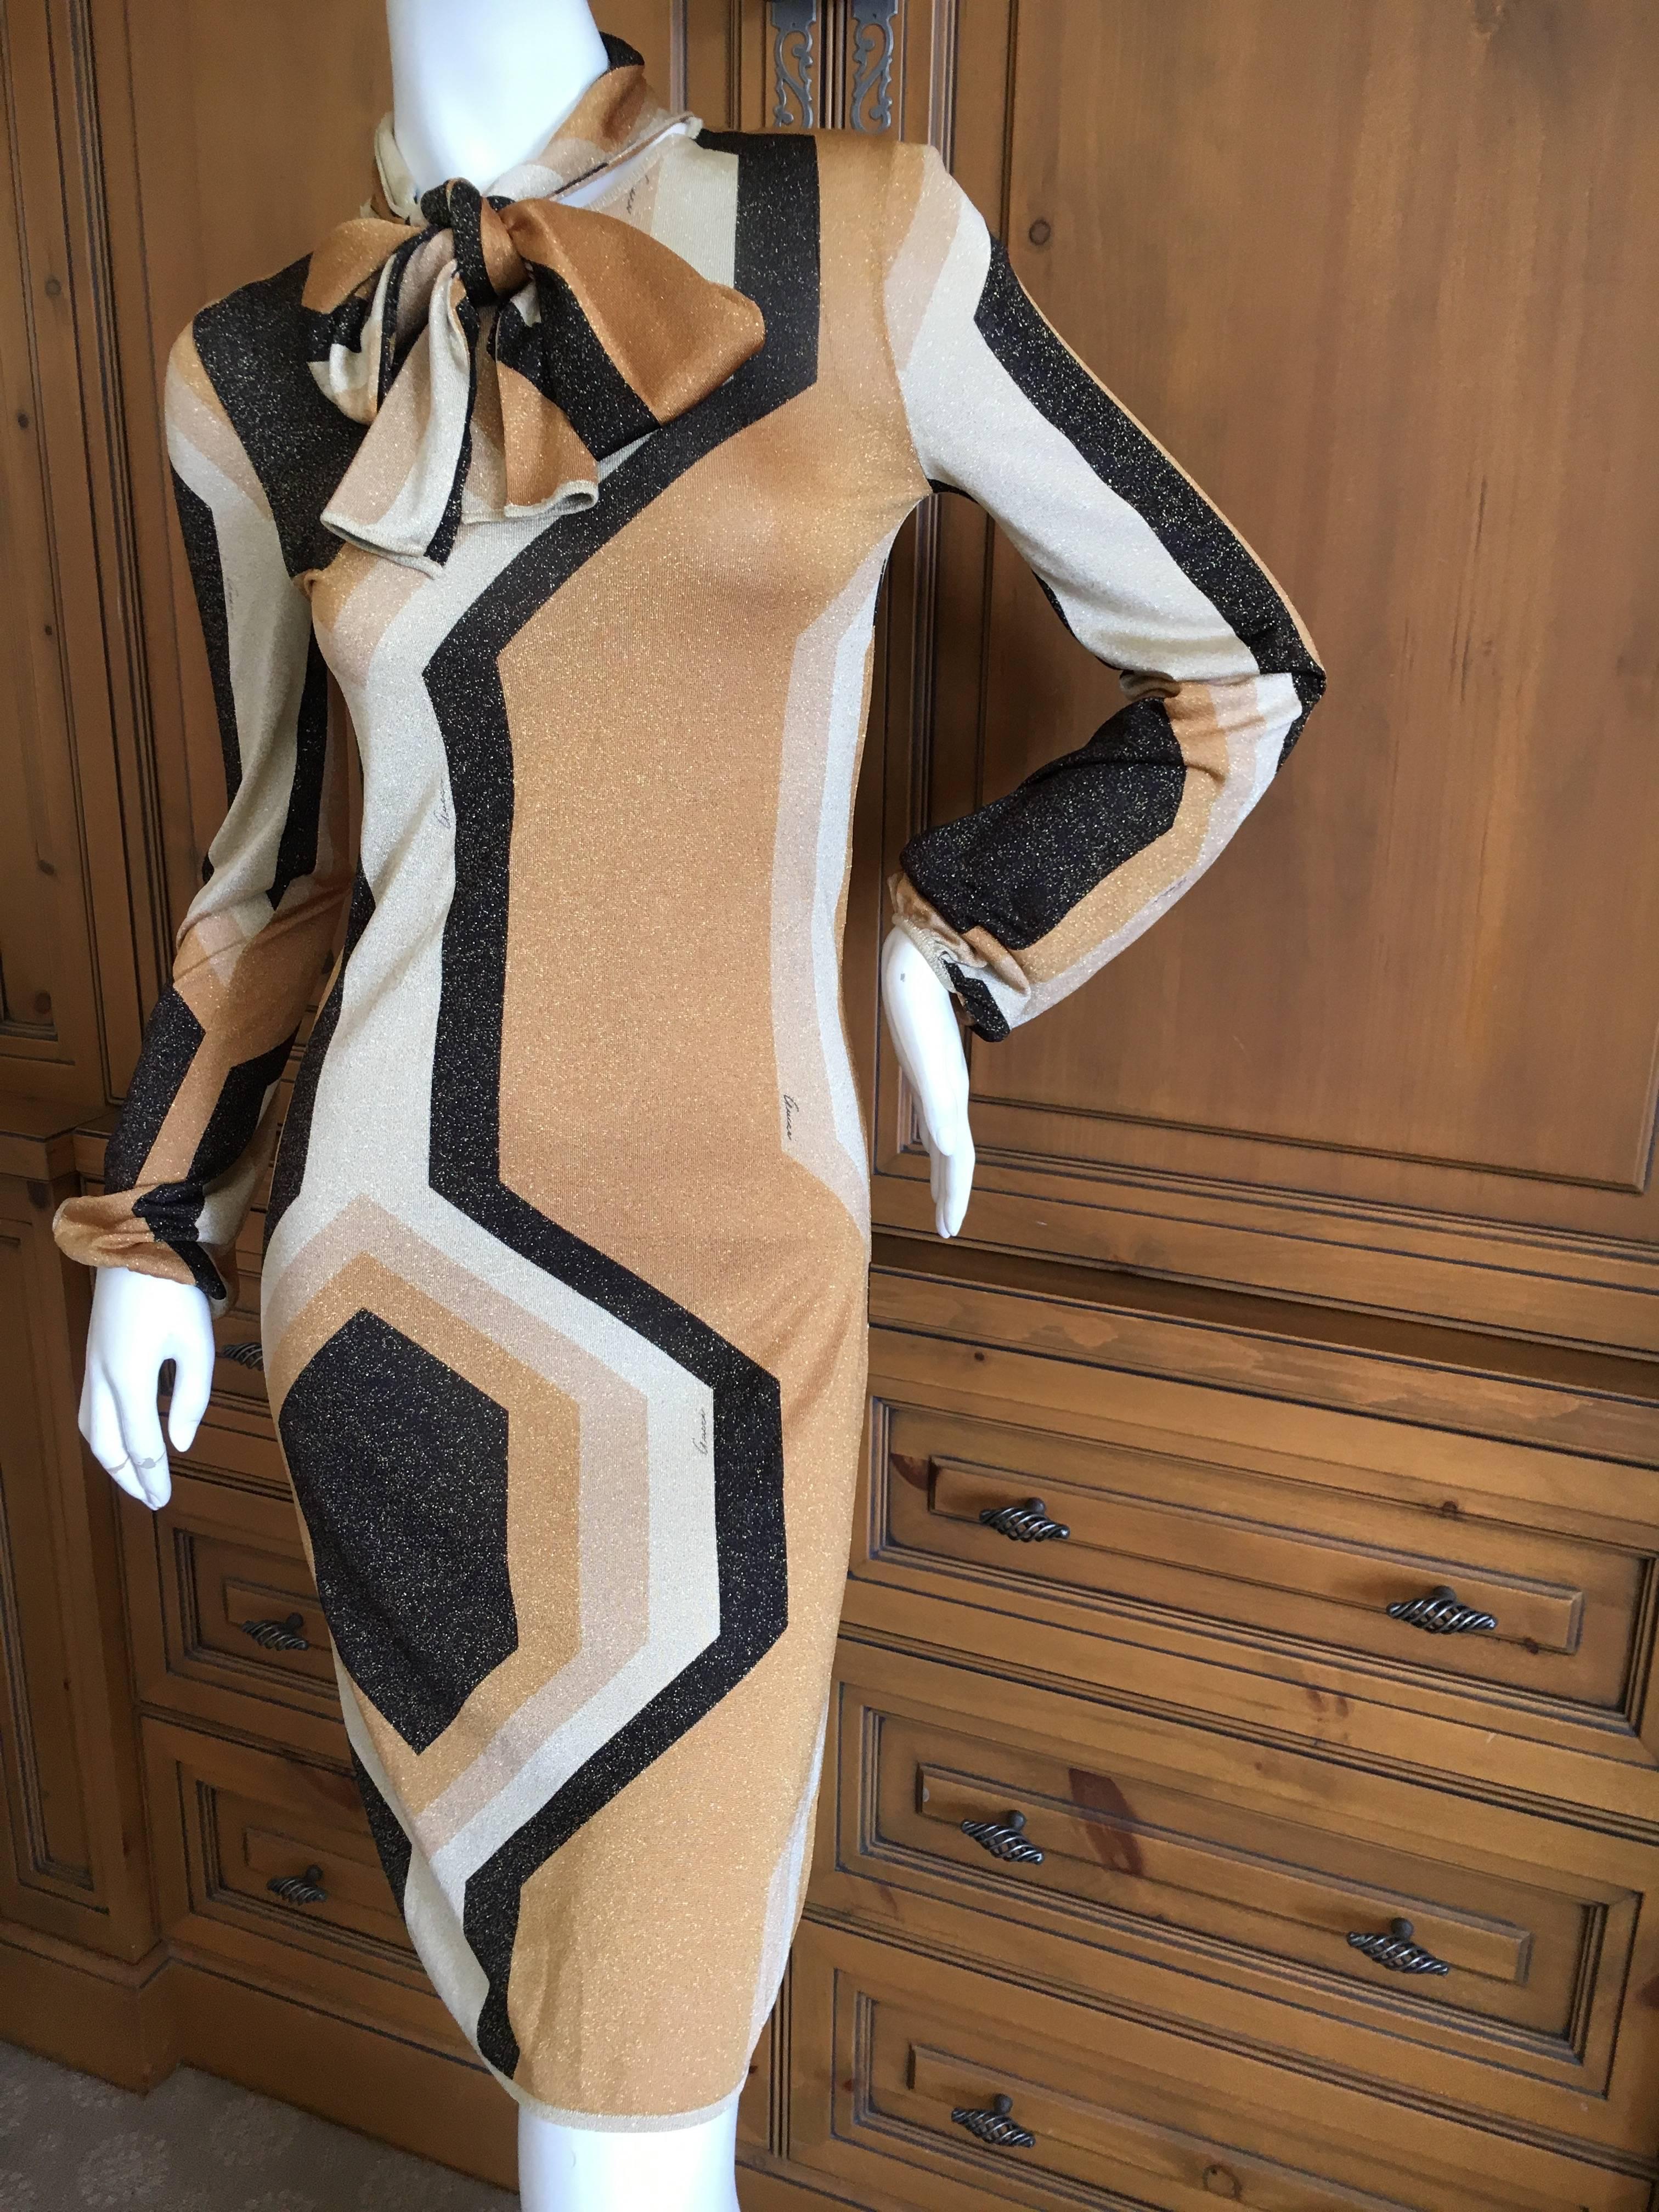 Gucci by Tom Ford Fall 2000 Gold Geometric Print Dress with Pussy Bow In Excellent Condition For Sale In Cloverdale, CA